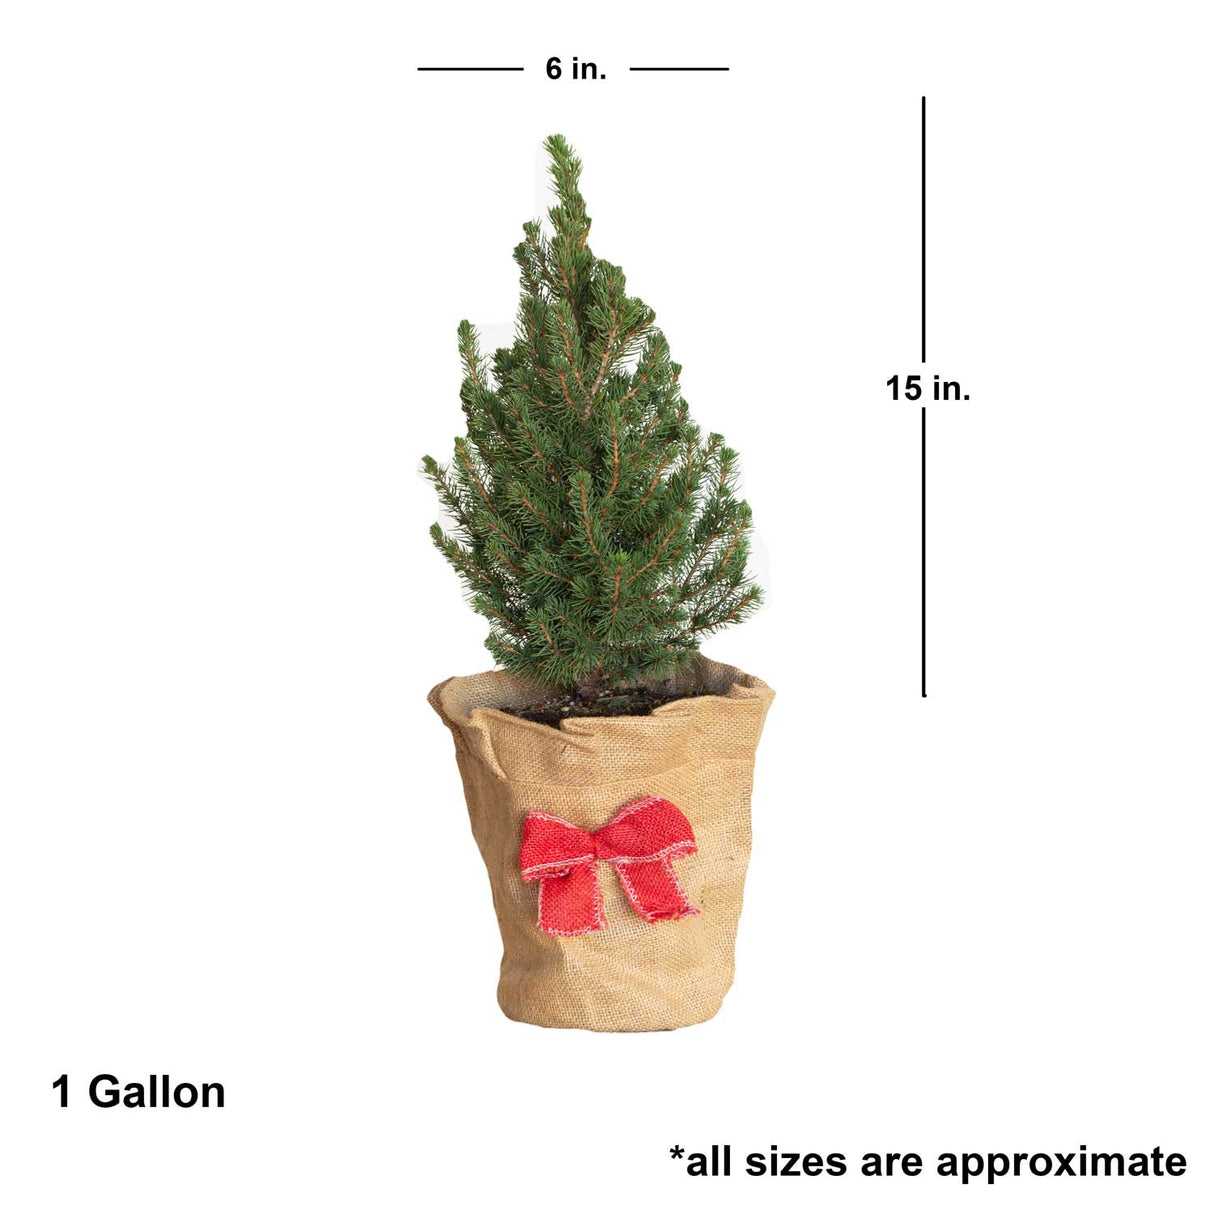 Dwarf Alberta Spruce Dimensions 6 inches wide and 15 inches wide